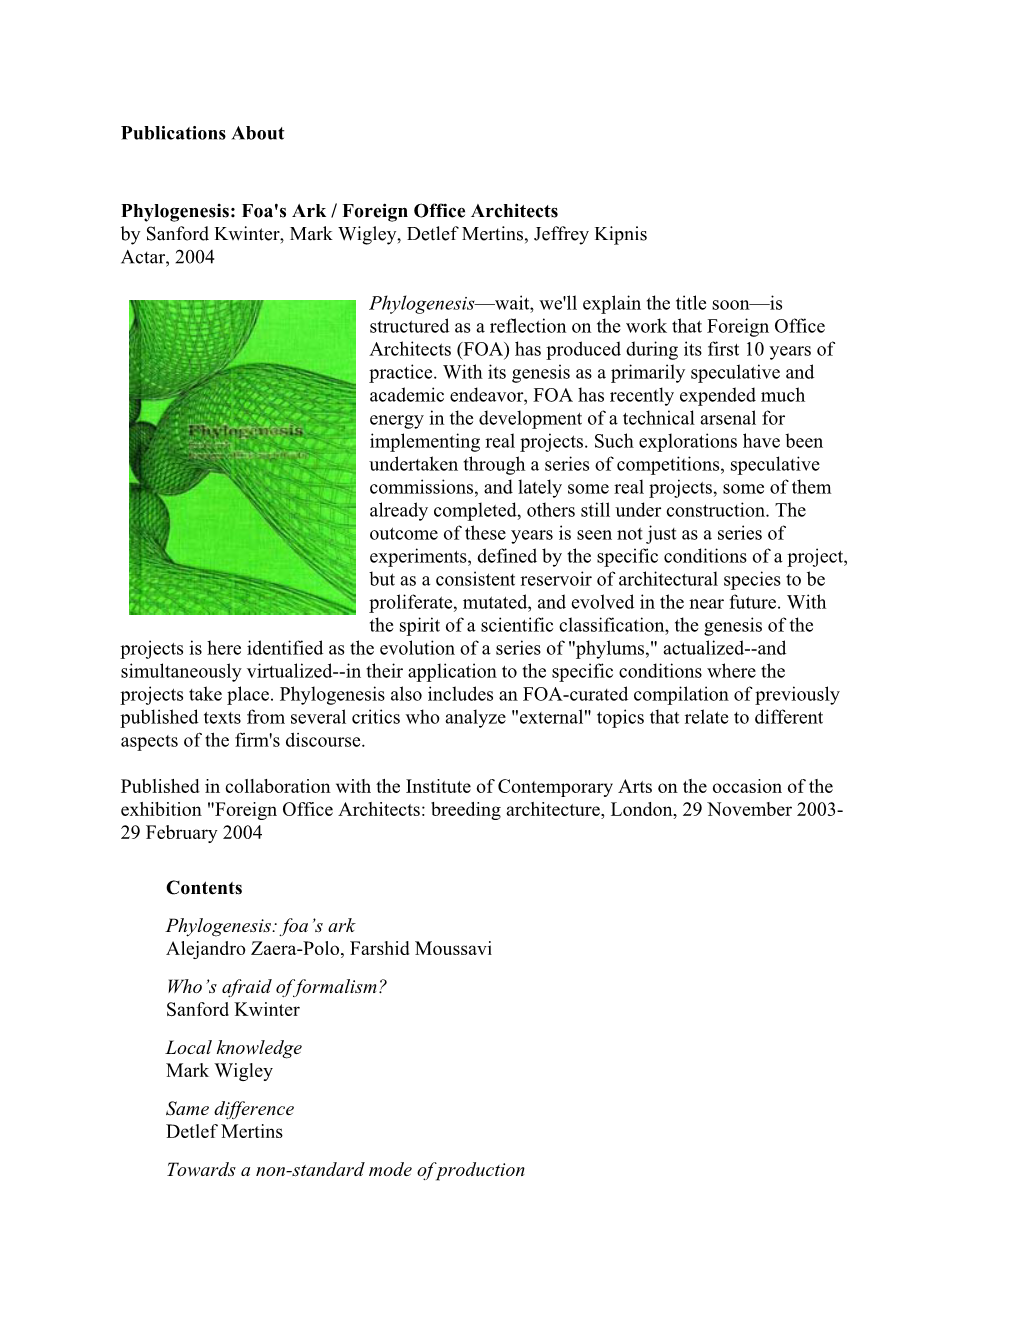 Publications About Phylogenesis: Foa's Ark / Foreign Office